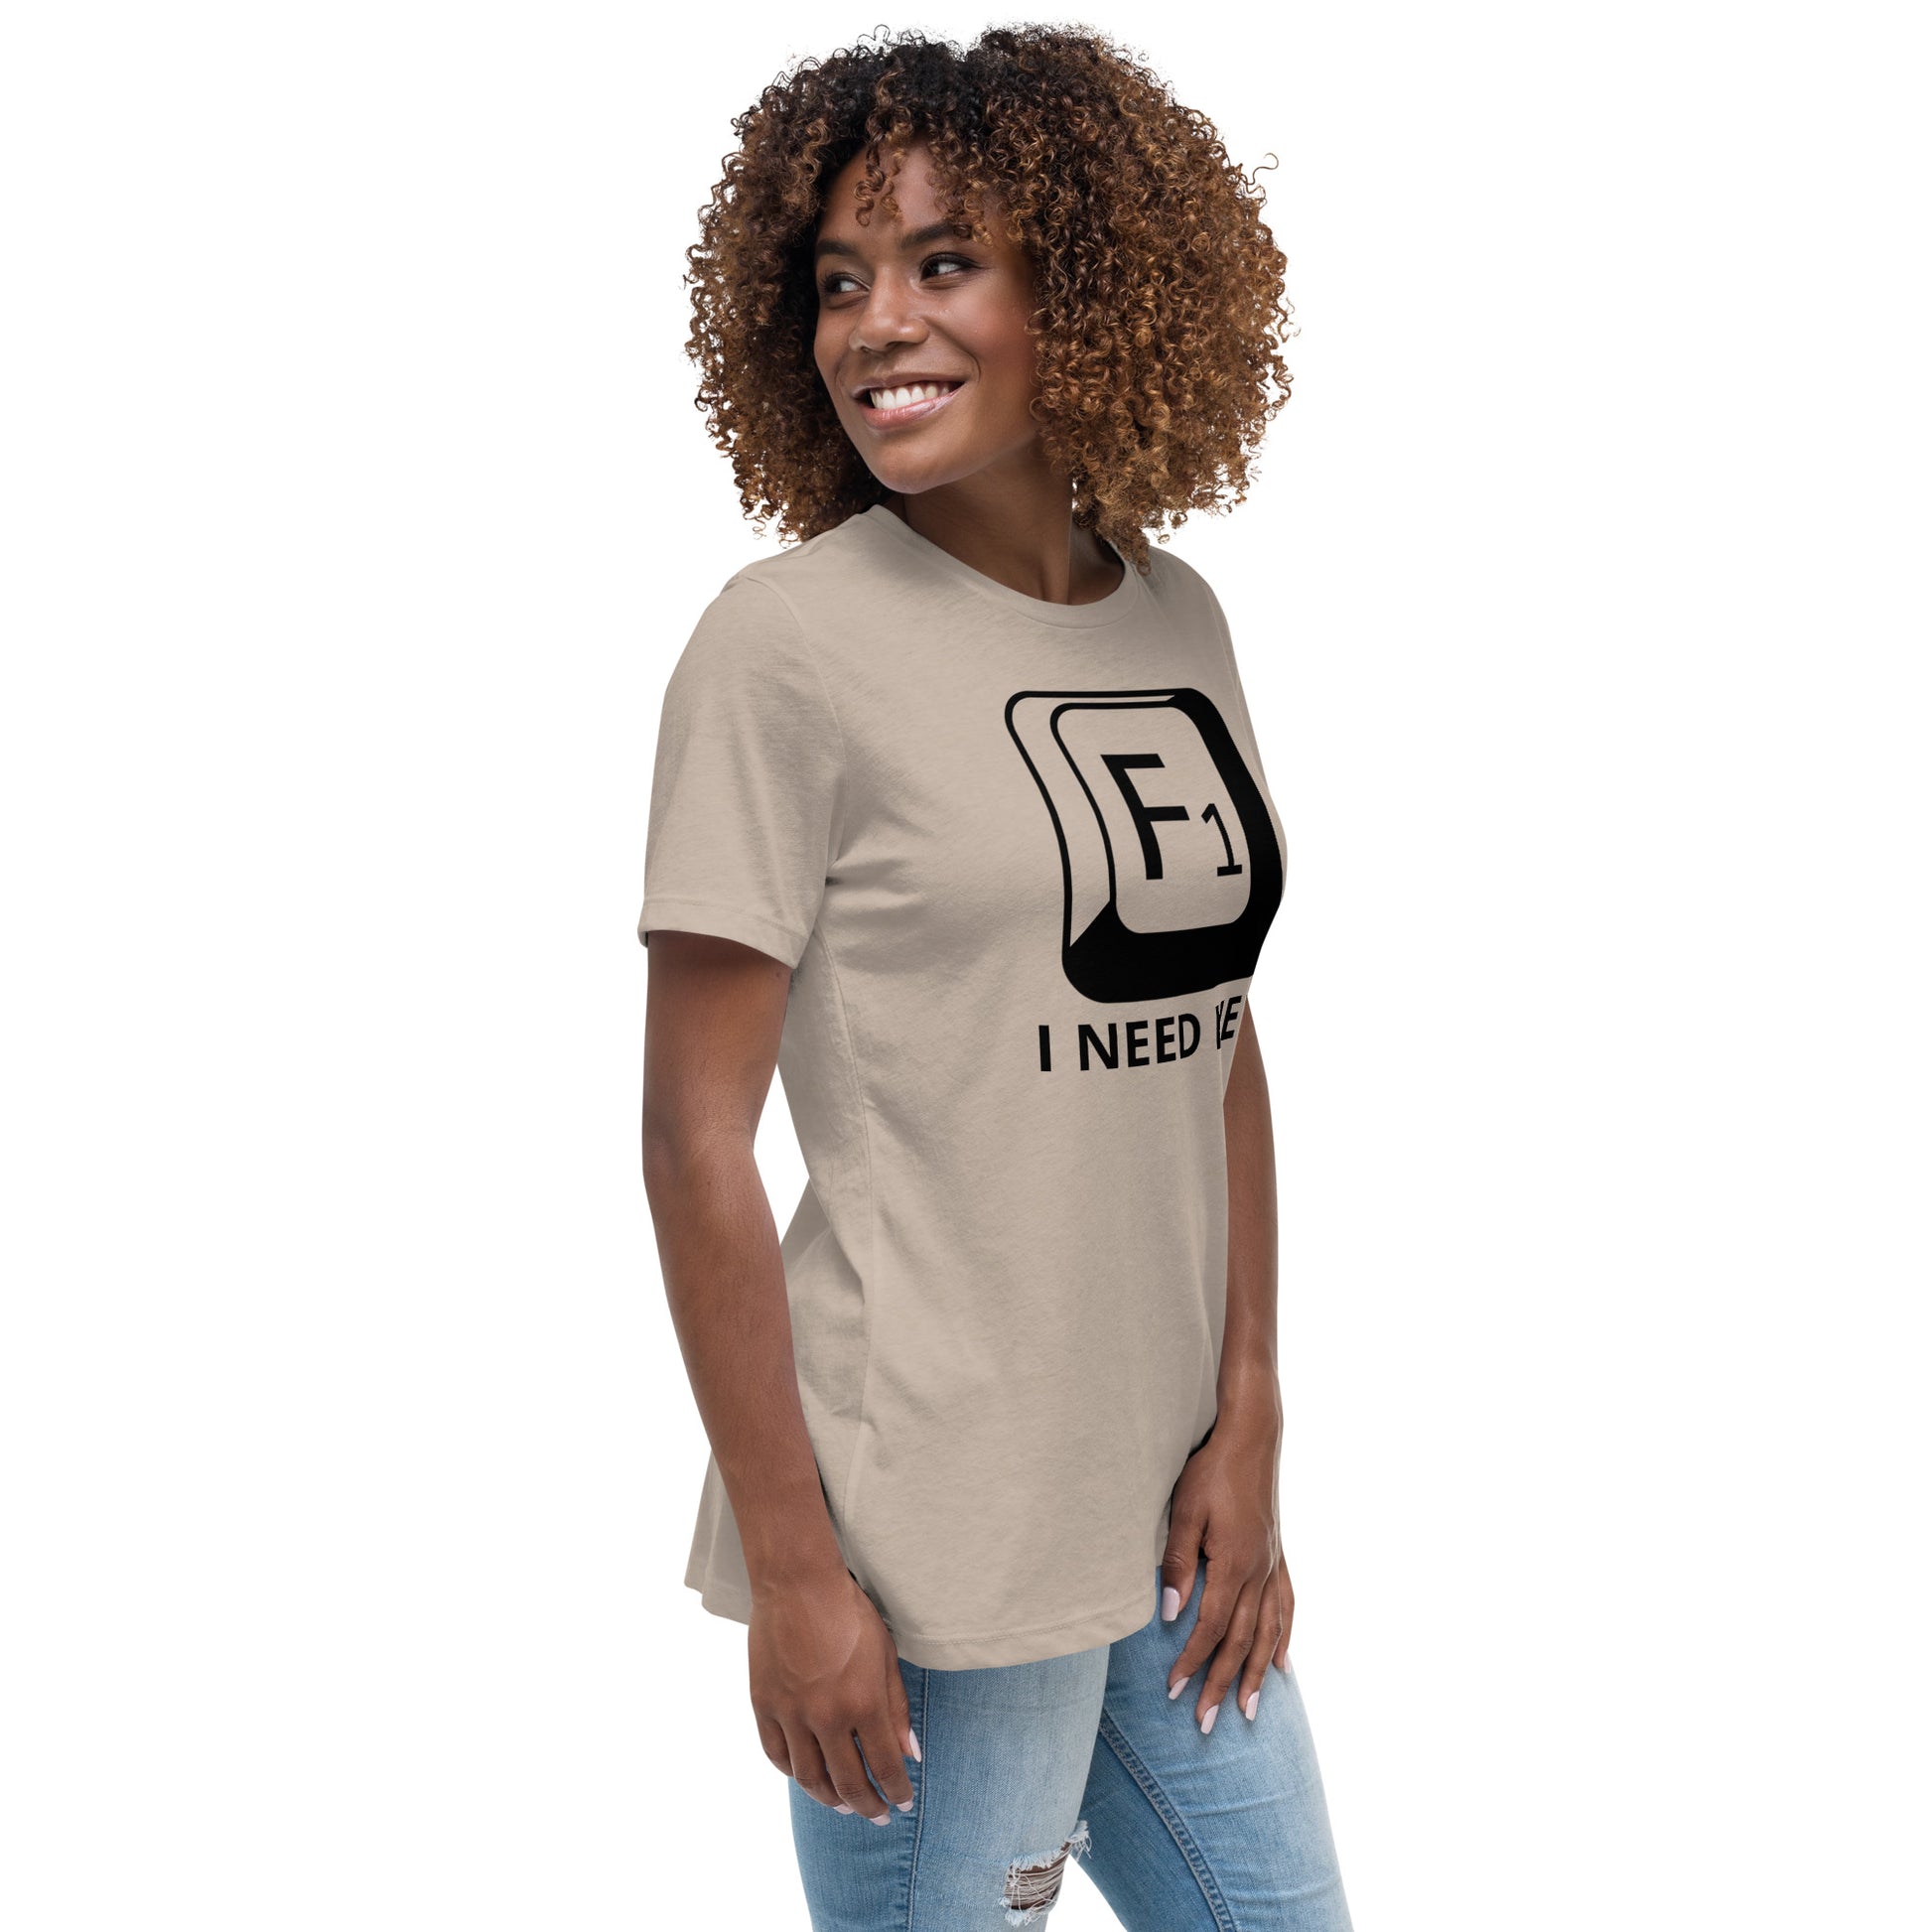 Woman with stone t-shirt with picture of "F1" key and text "I need help"